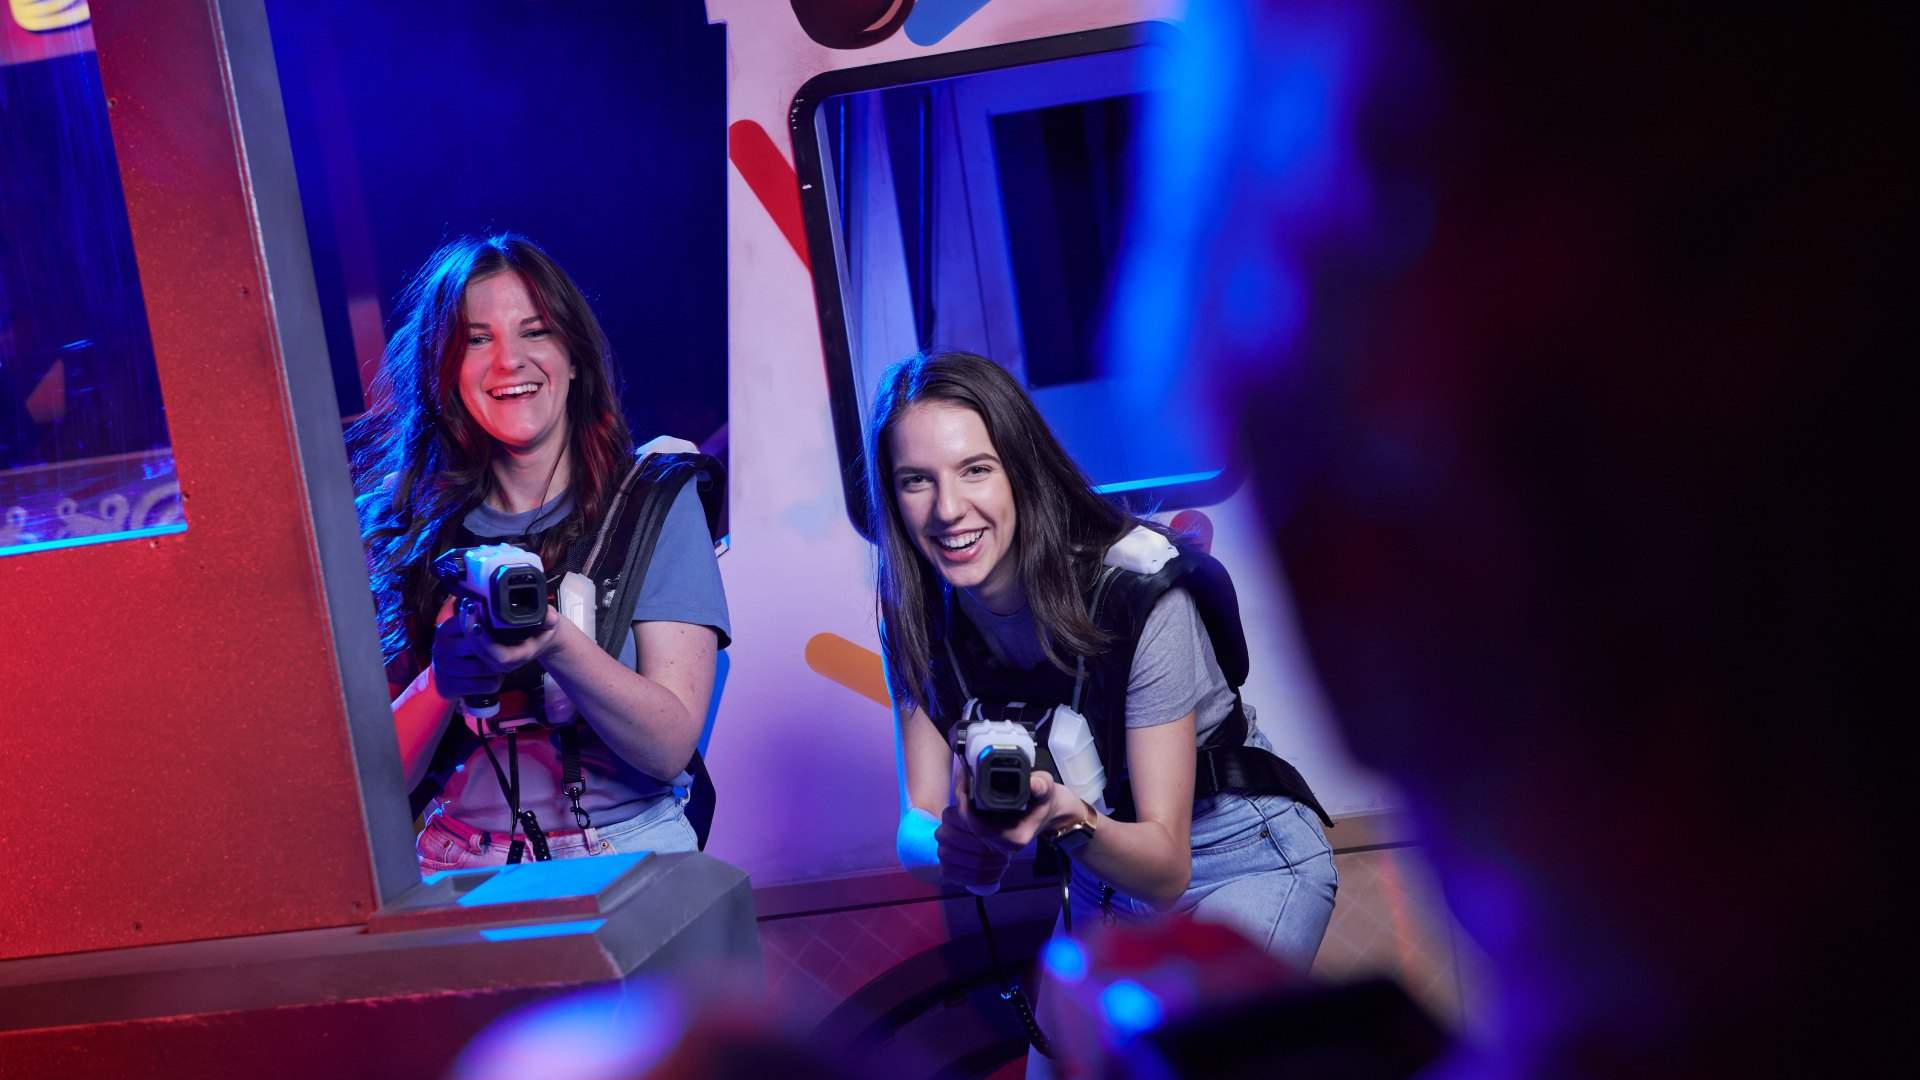 A New Laser Tag Game and Zero Latency Experience Have Joined the Menu at Archie Brothers in Docklands